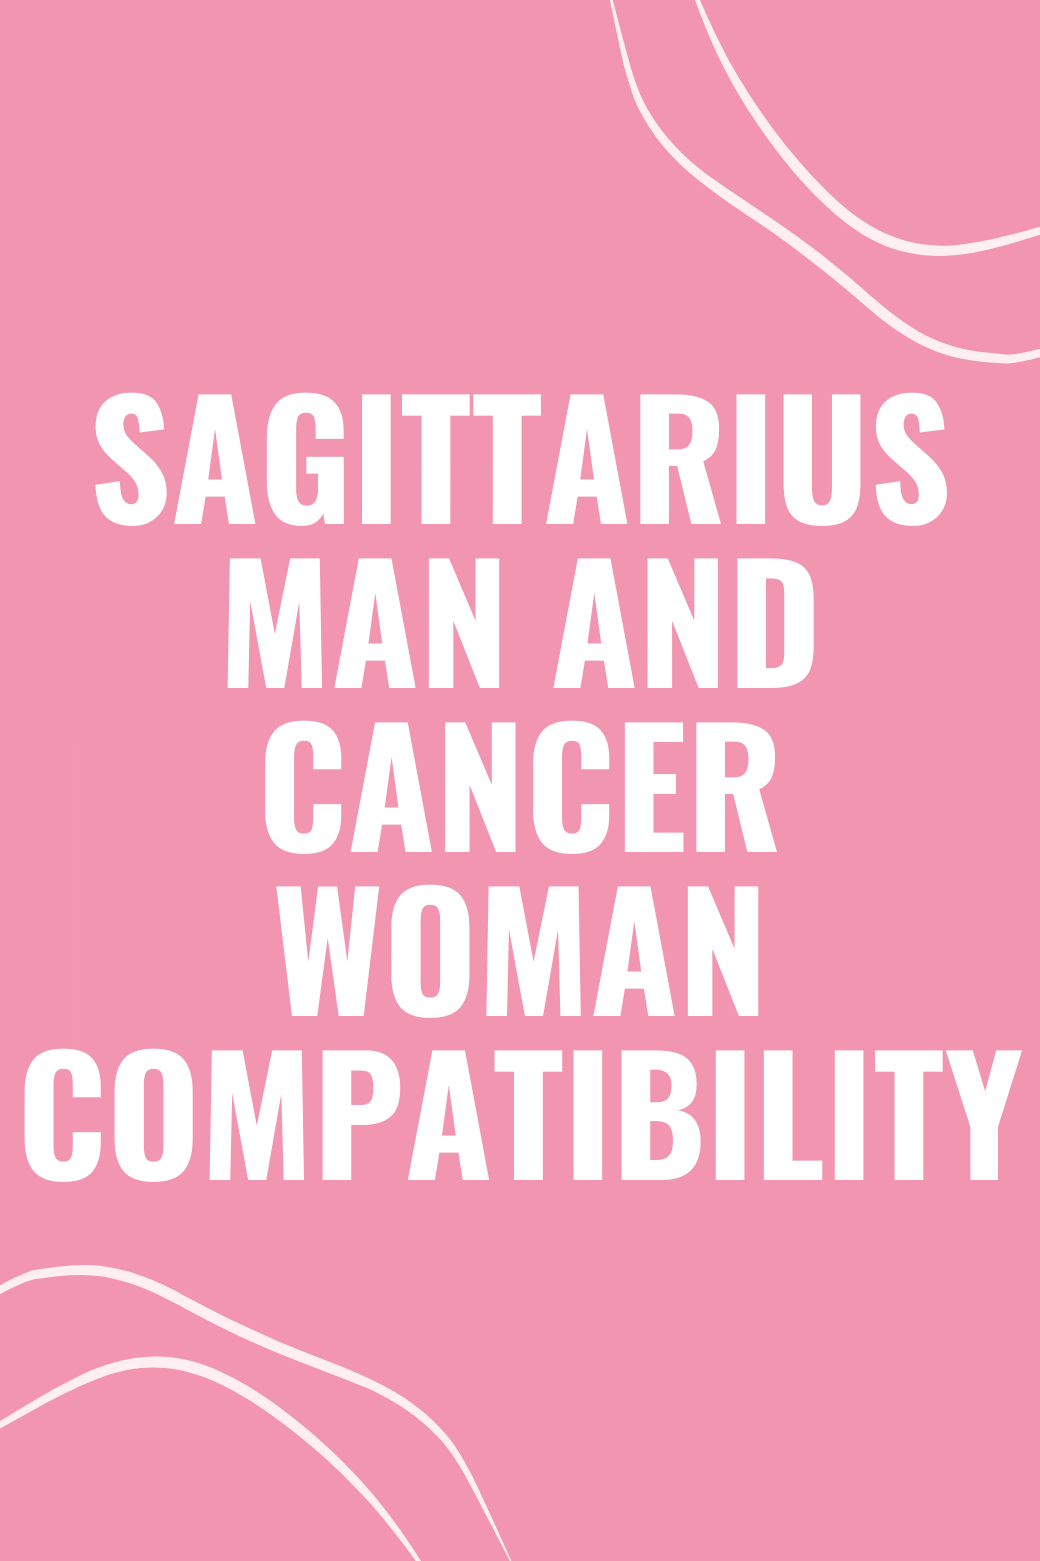 Sagittarius Man and Cancer Woman Compatibility